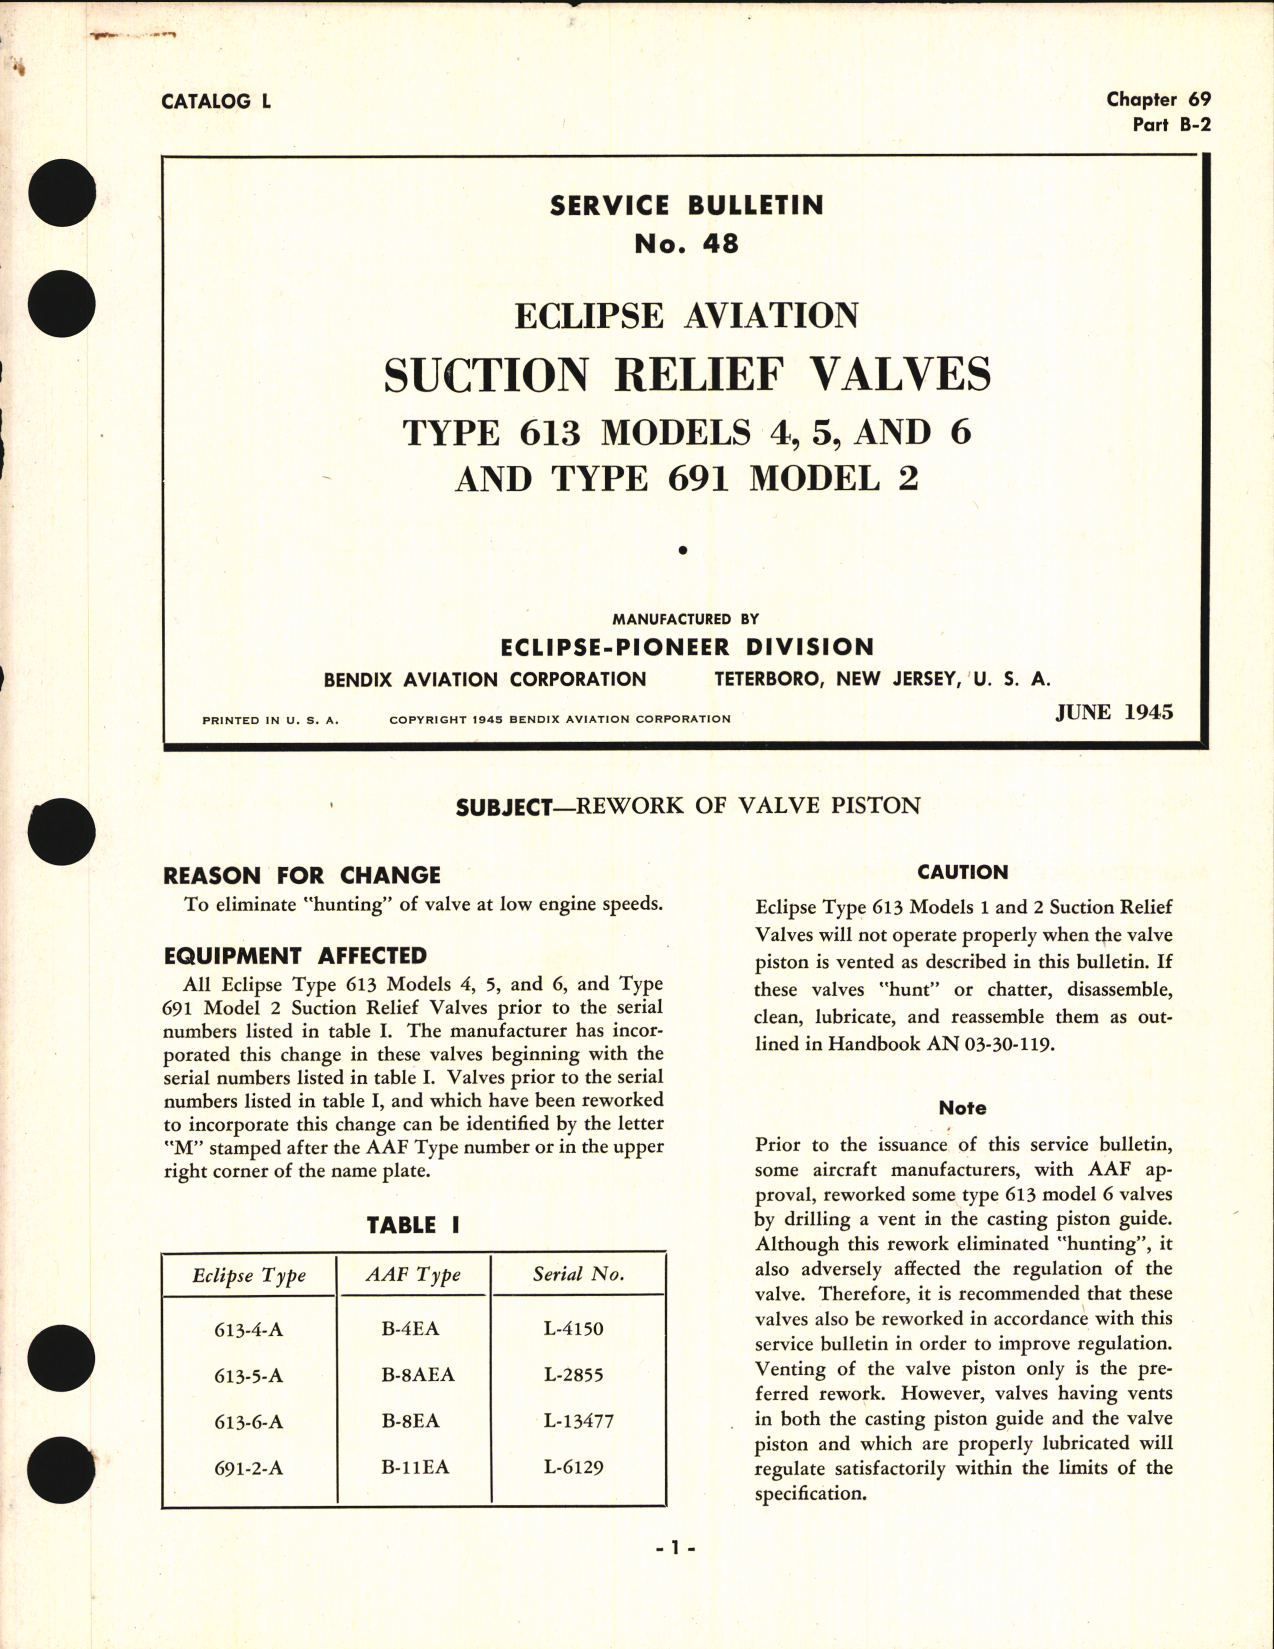 Sample page 1 from AirCorps Library document: Service Bulletin No. 48 for Eclipse Aviation Suction Relief Valves 